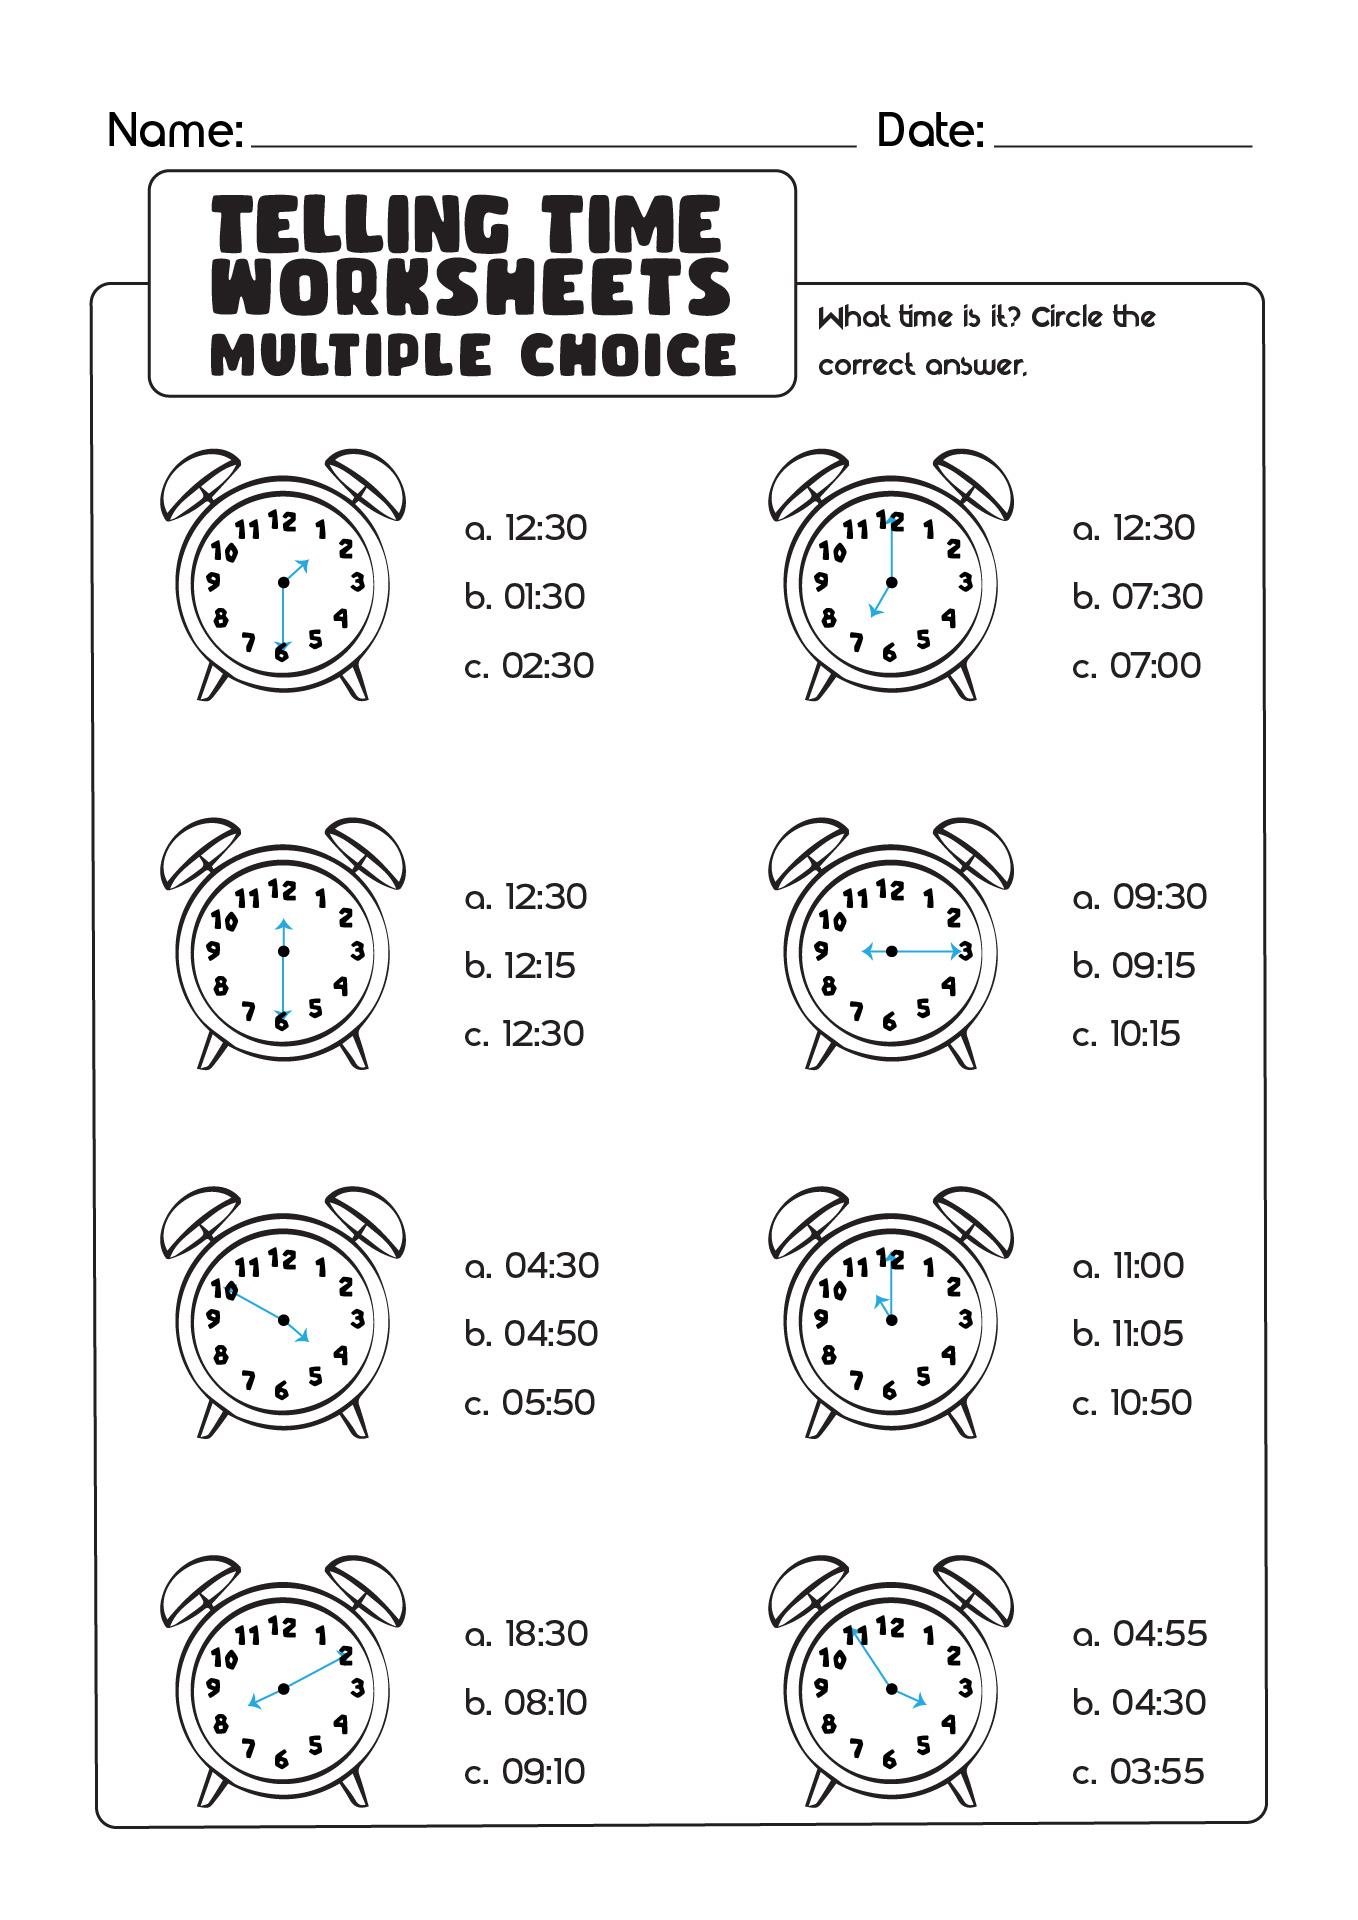 Telling Time Worksheets Multiple Choice Image